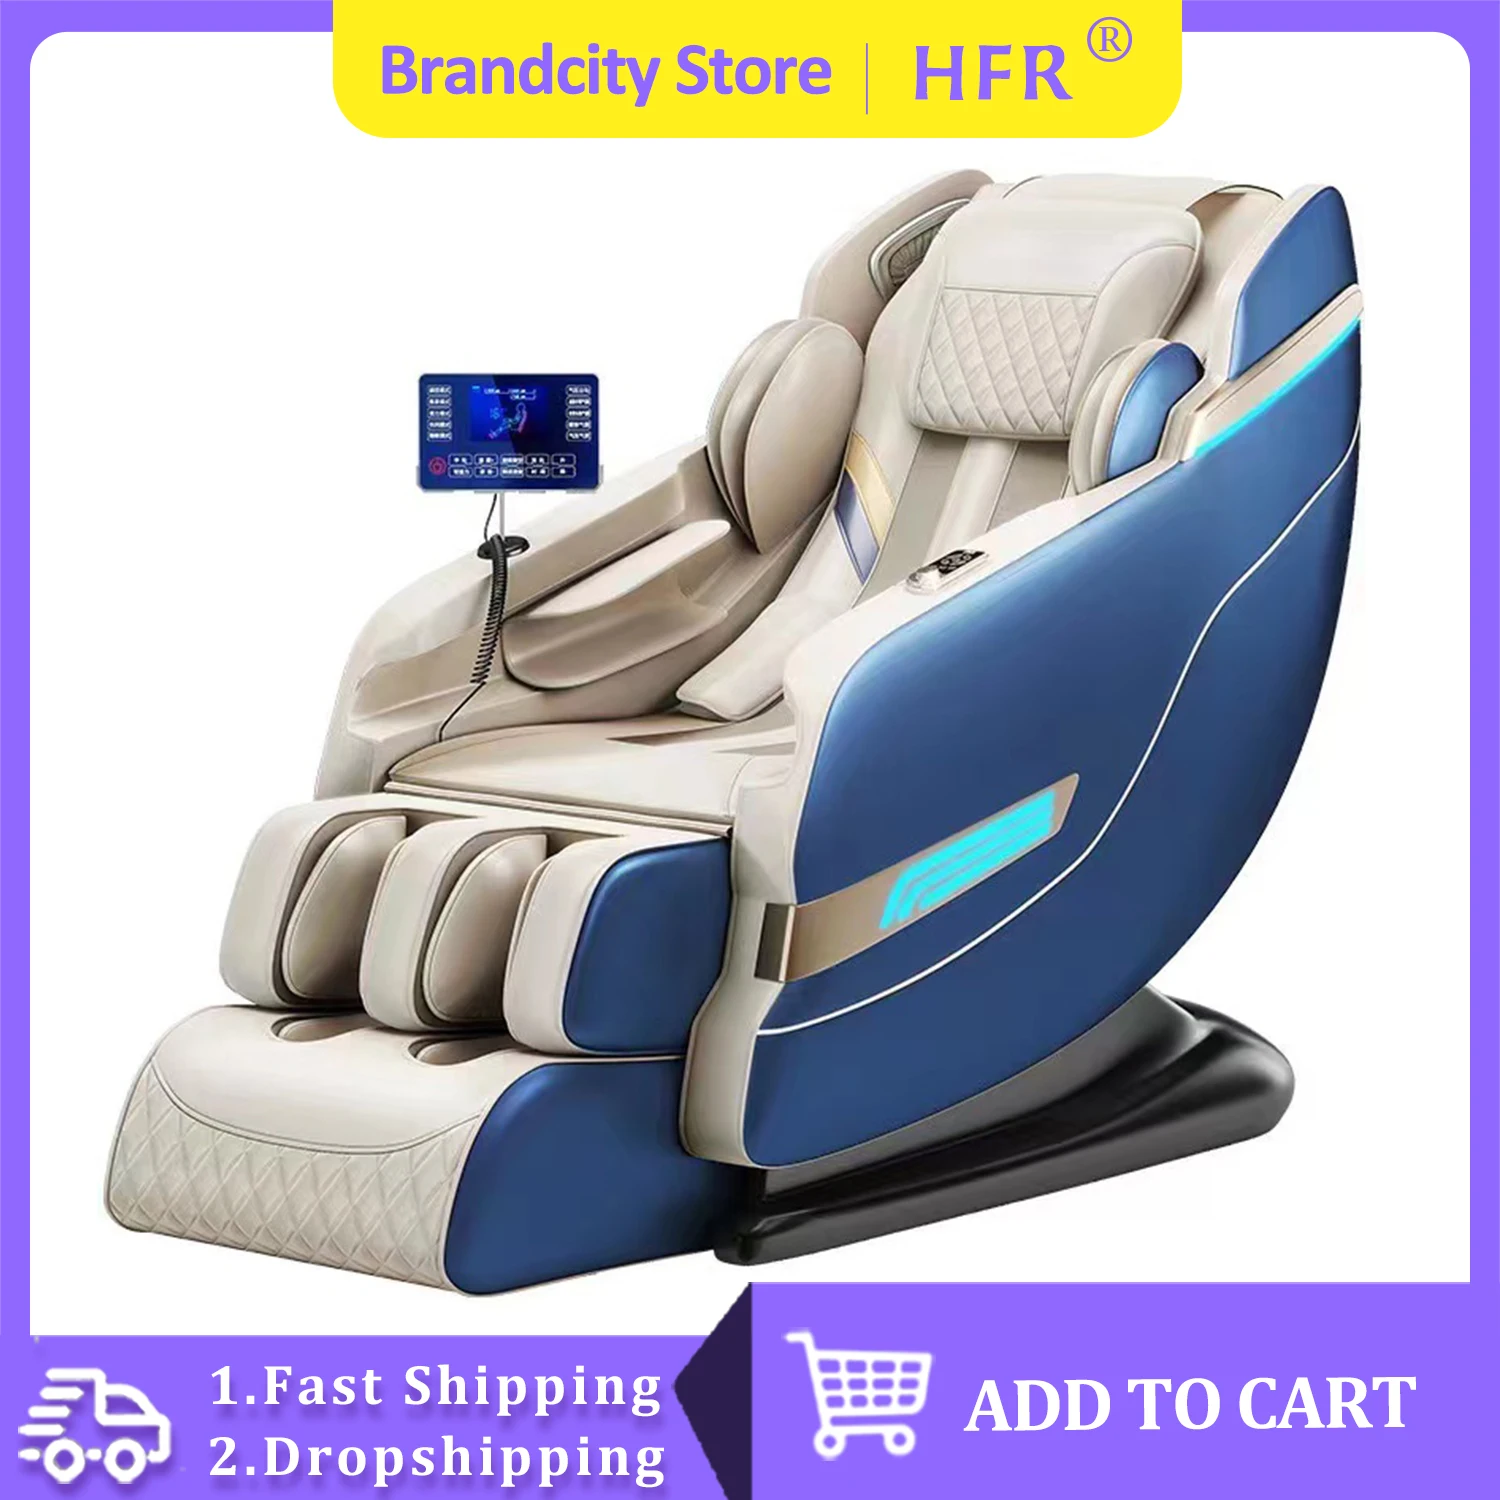 HFR-L3 Luxury massage chair home commercial multifunctional intelligent fully automatic shared capsule sofa